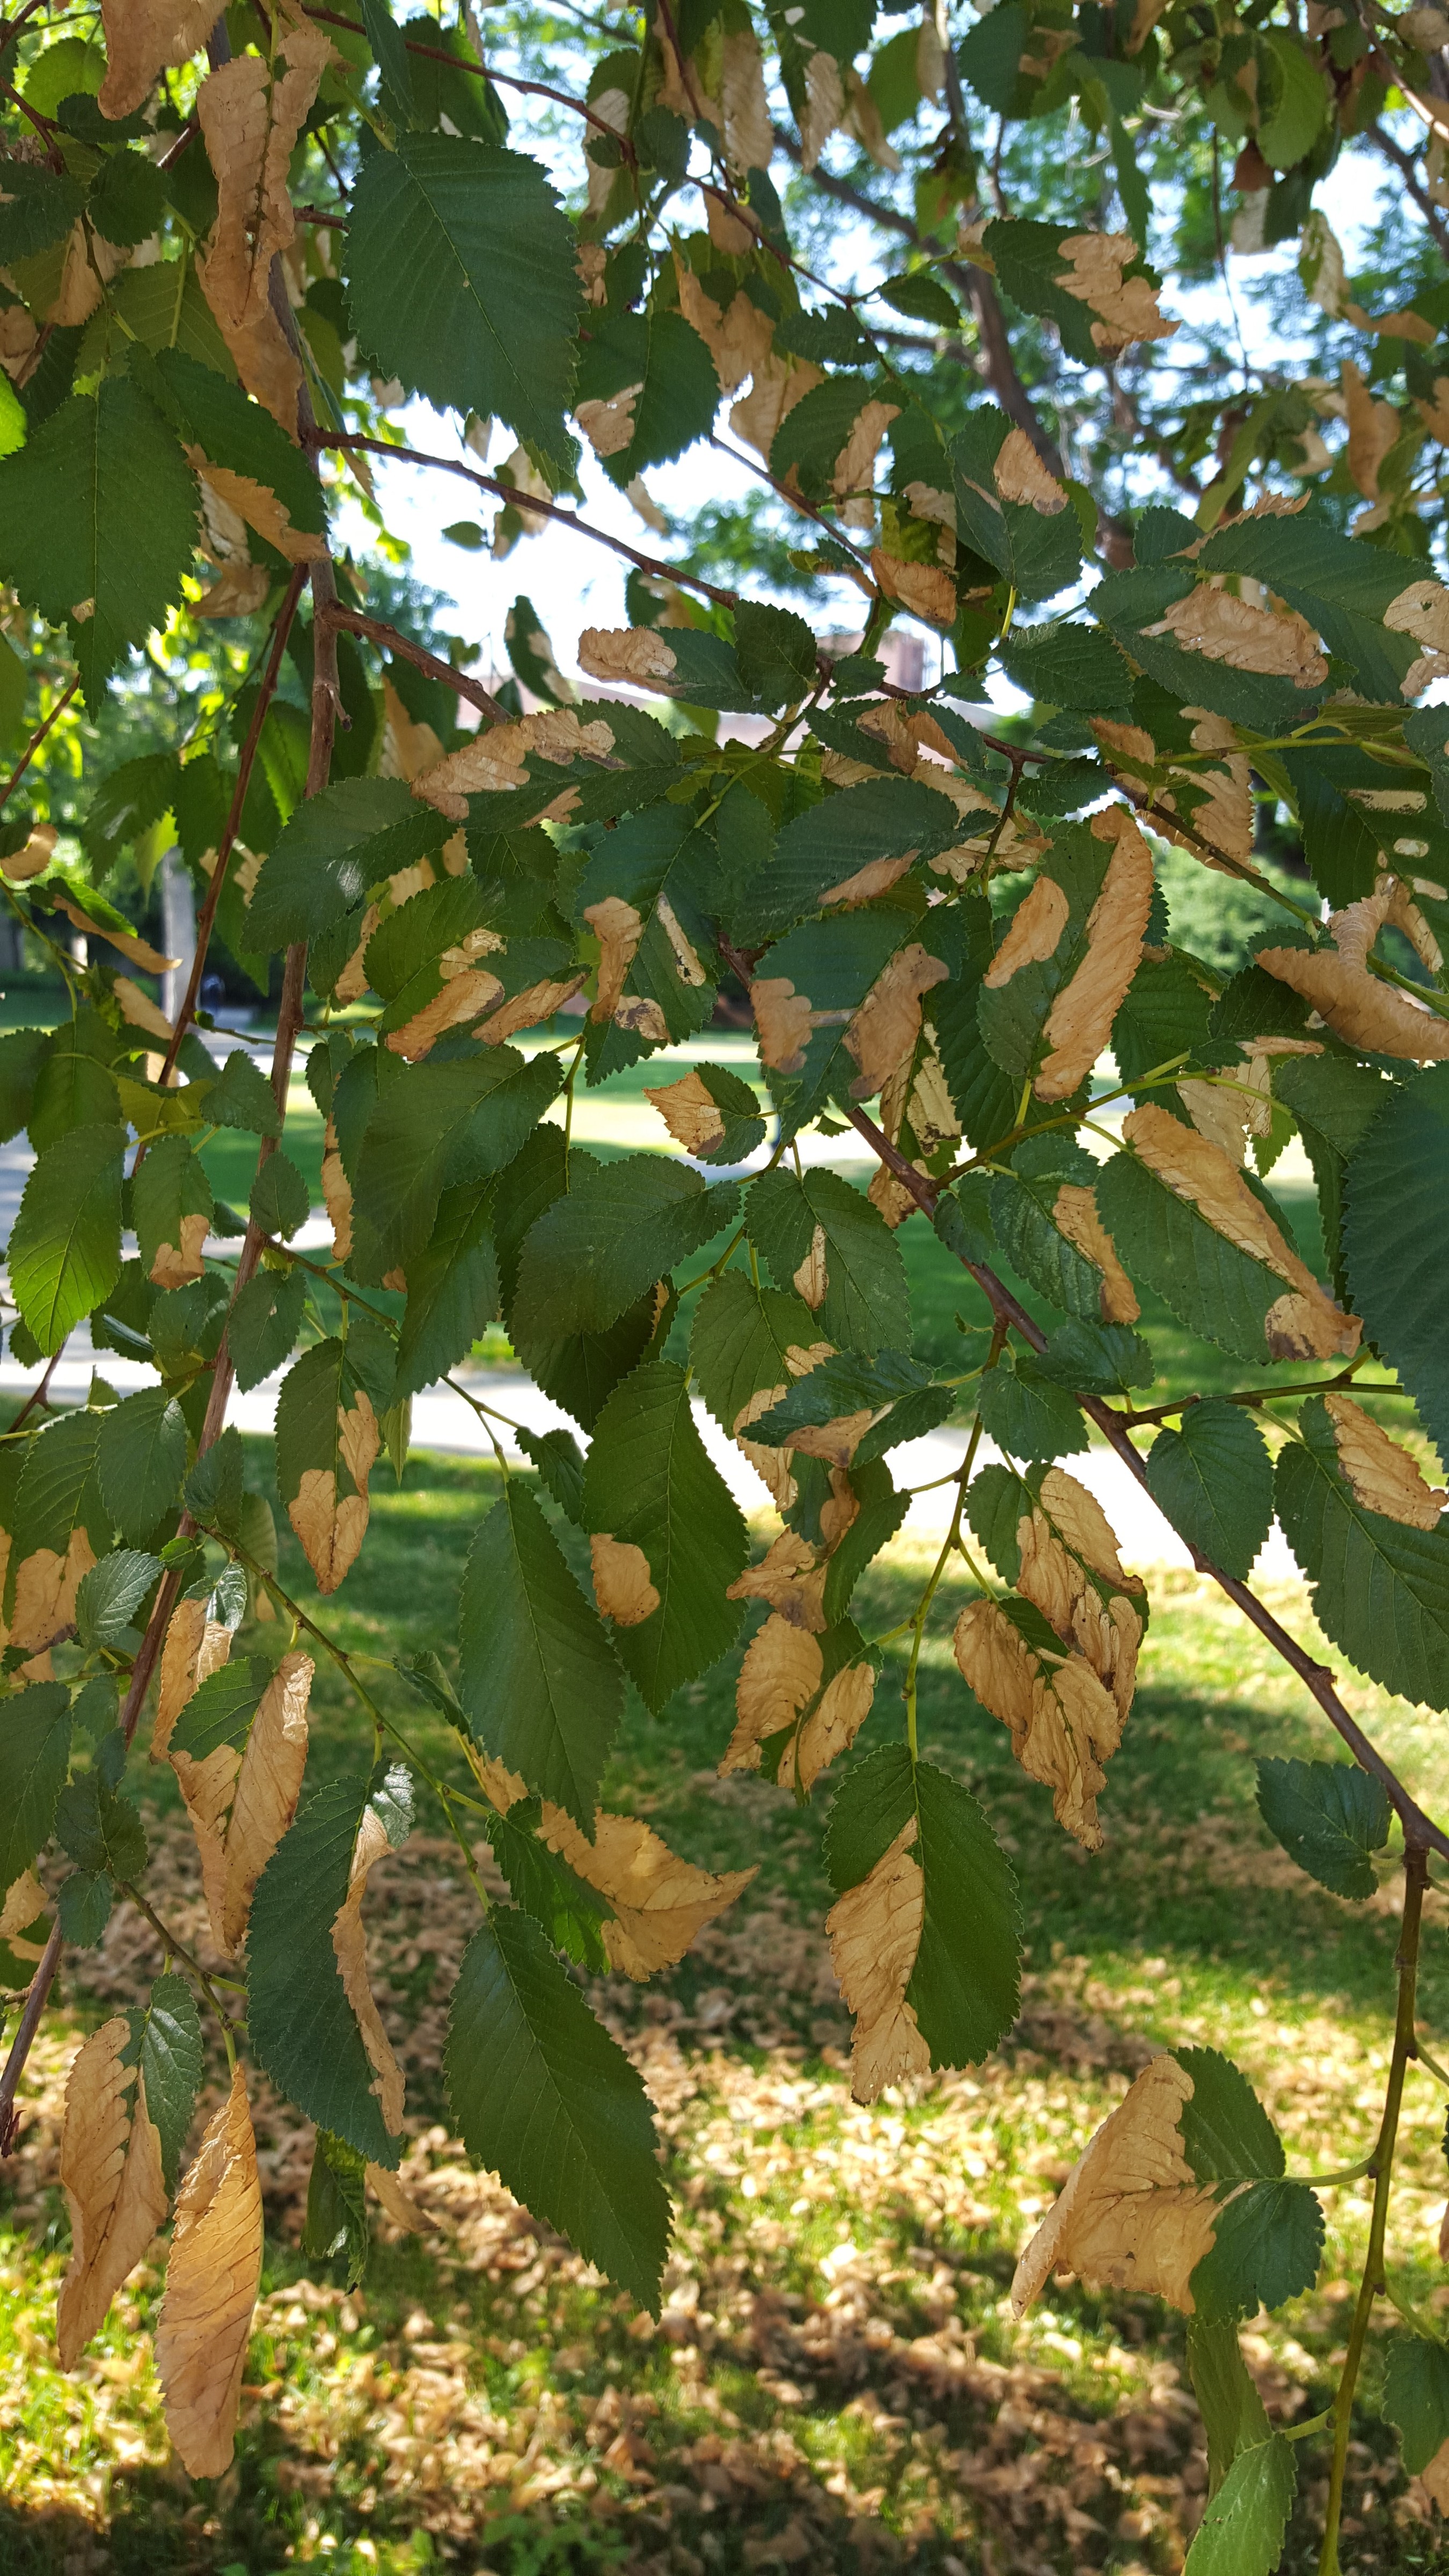 leaves turning brown on my elm tree - Ask an Expert